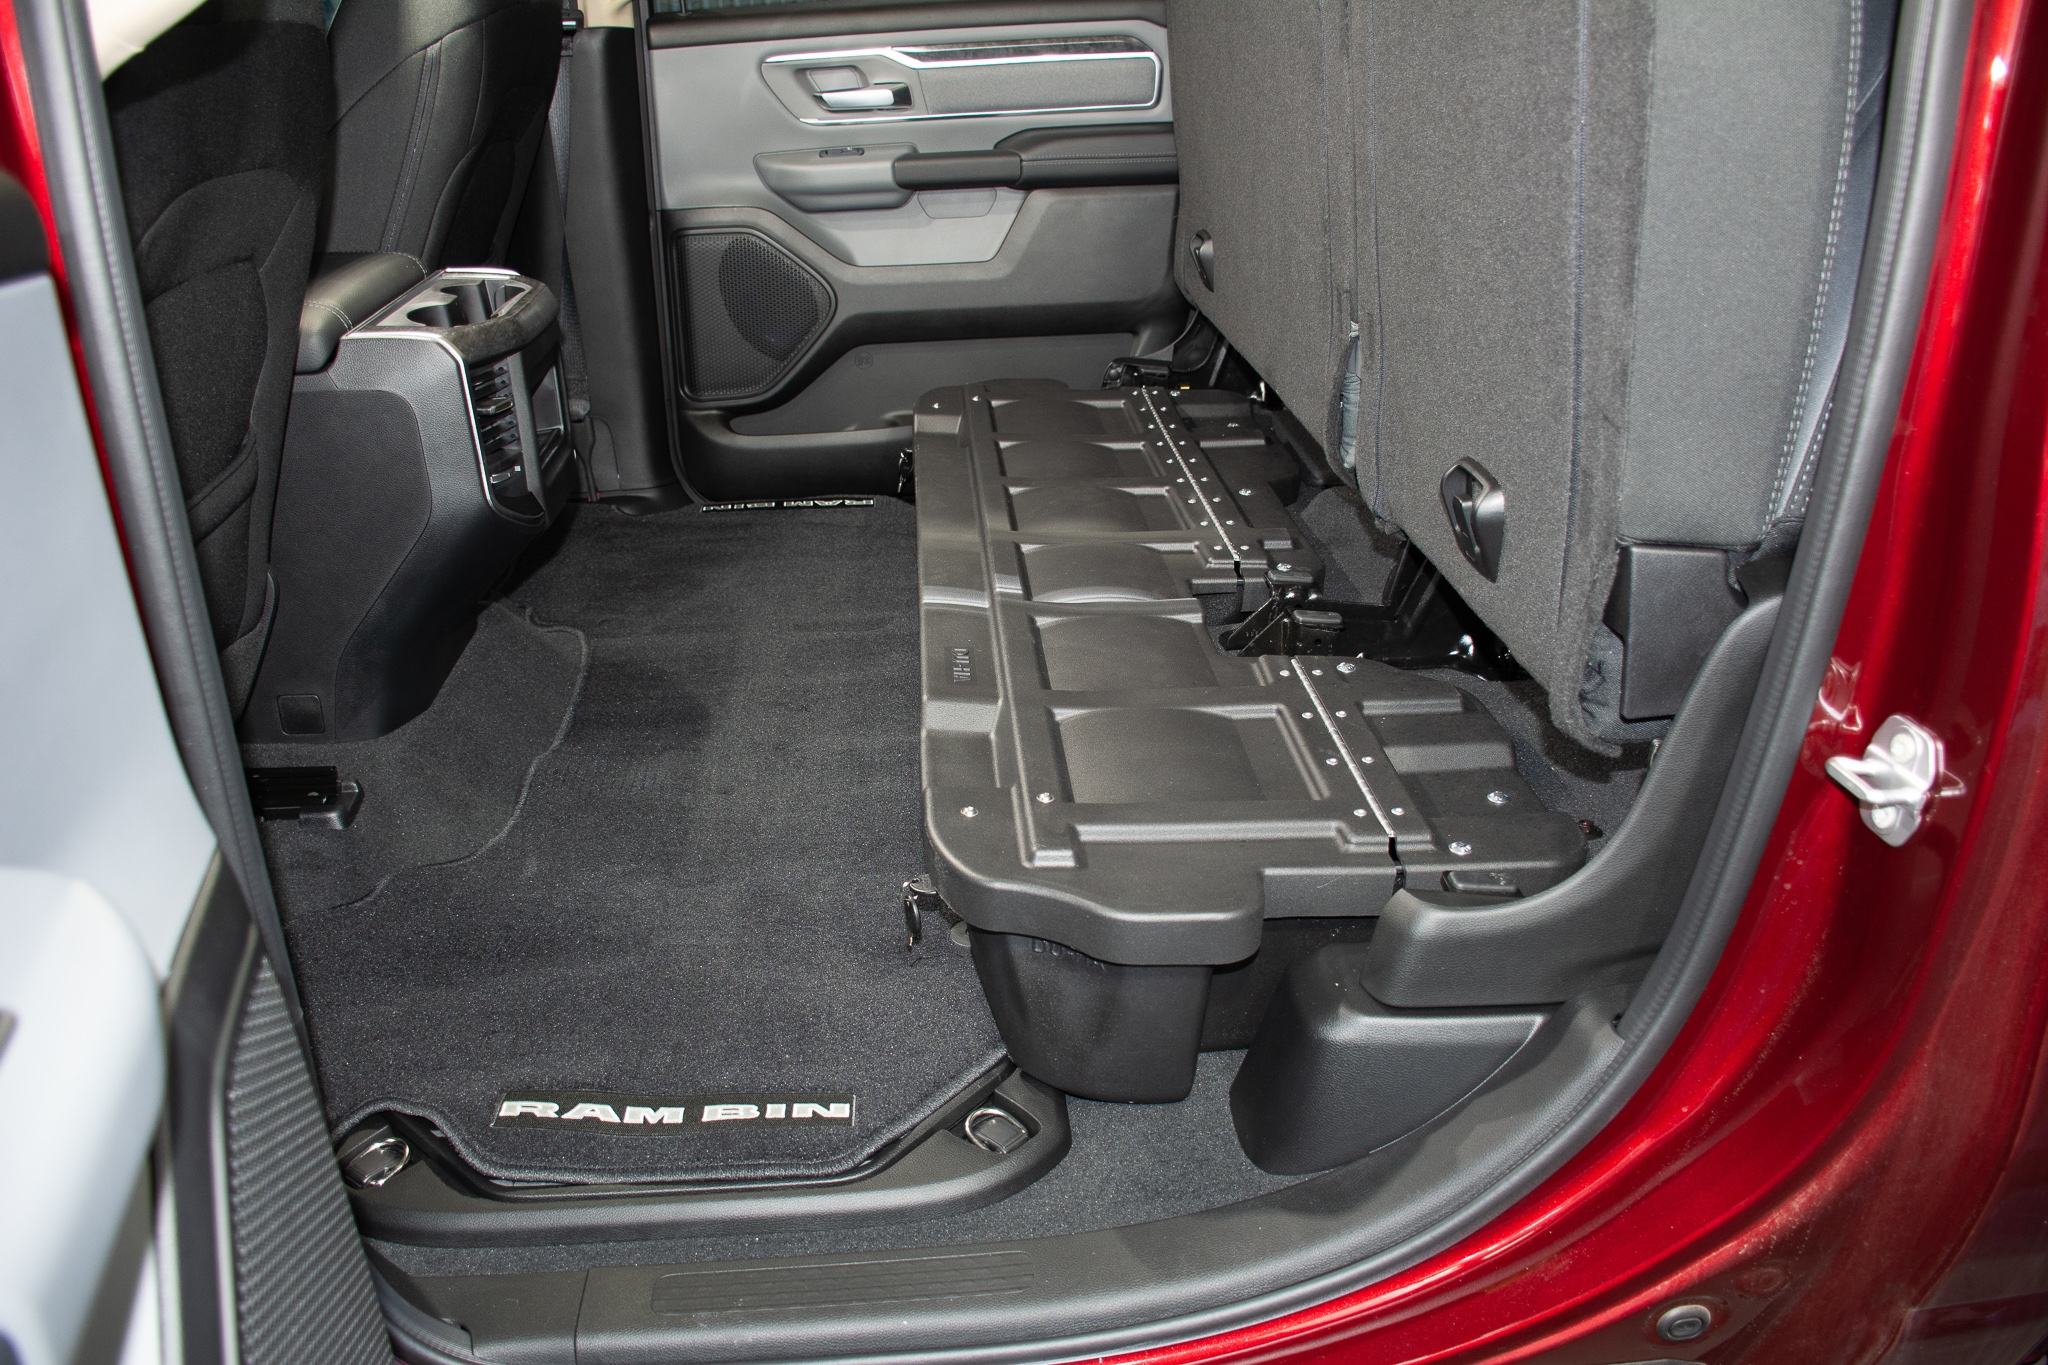 The DU-HA fits underneath the pre-existing back seats of your truck. The DU-HA will hold larger items without the organizers / gun rack installed.